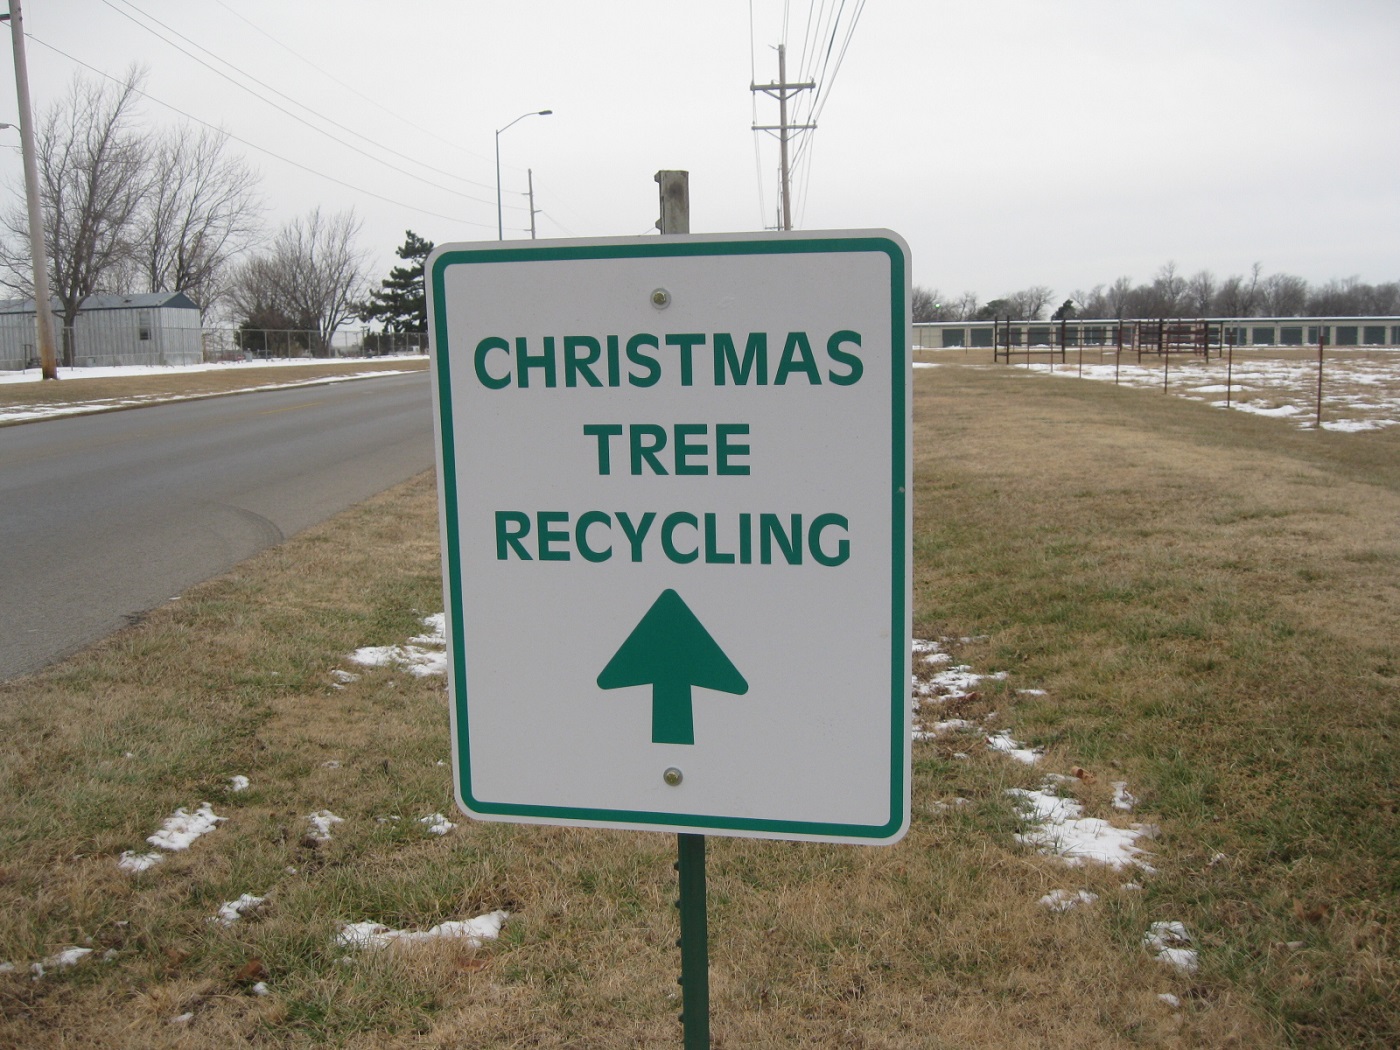 Christmas tree recycling drop-off sign - 5 traditional practices that are getting in the way of green living